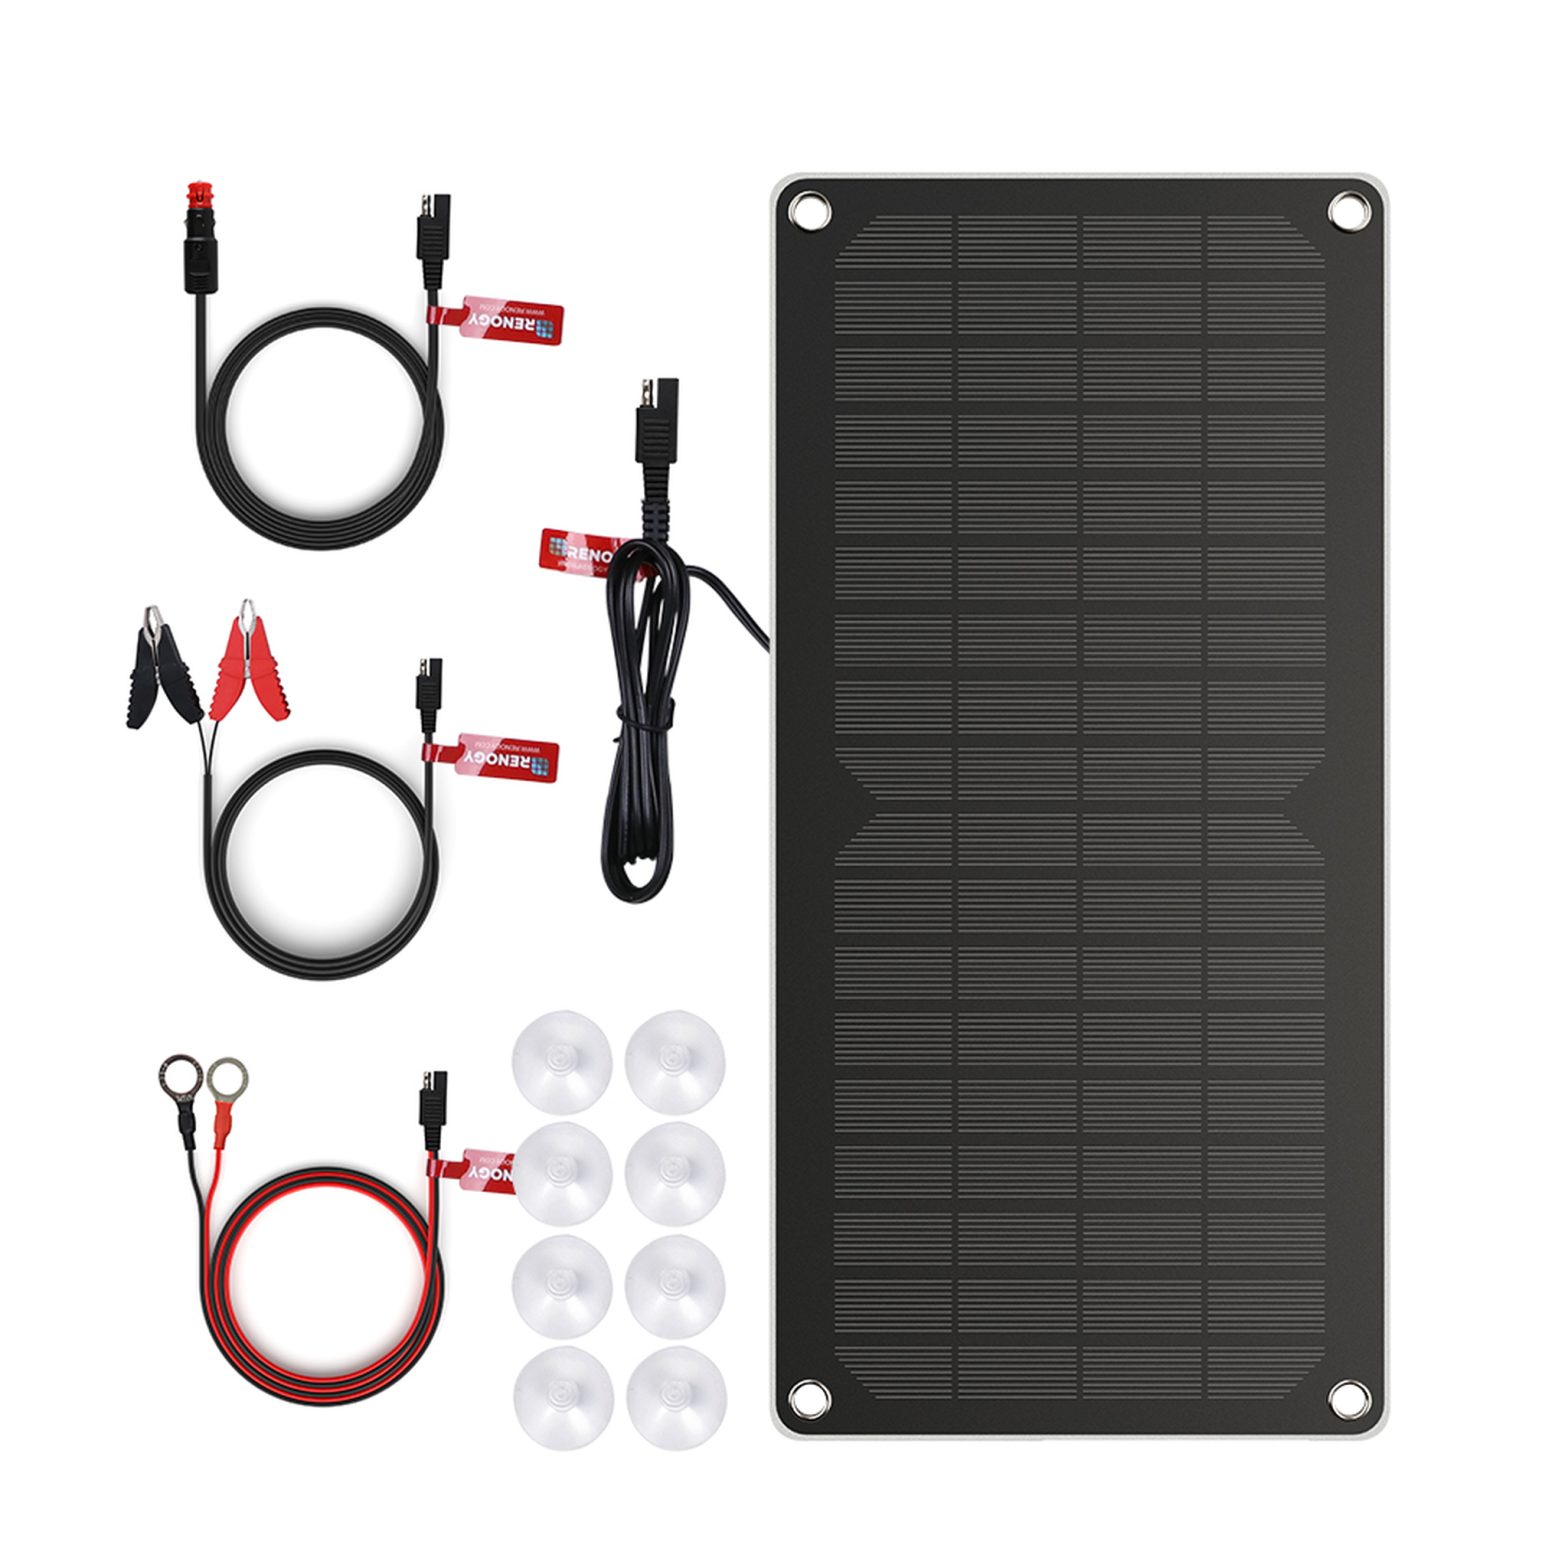 RENOGY 10W Solar Battery Charger Maintainer RSP10BM User Guide